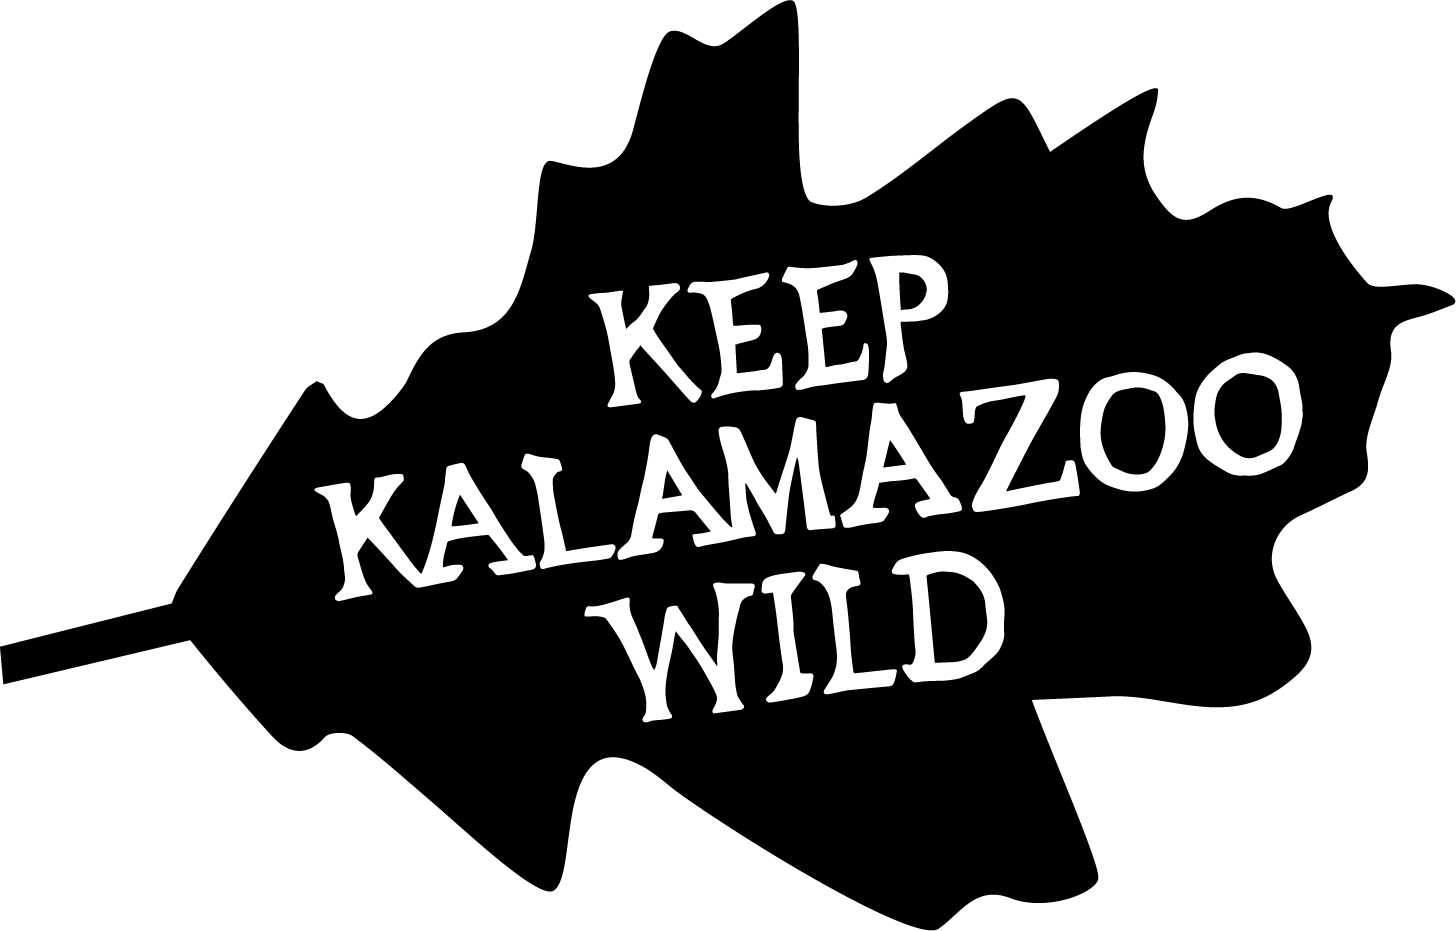 Keep Kalamazoo Wild is the rallying slogan and the branding for a line of merchandise being sold to help the Stewards of Kleinstuck buy nearly 12 acres of wooded land adjacent to the Kleinstuck Preserve in Kalamazoo.